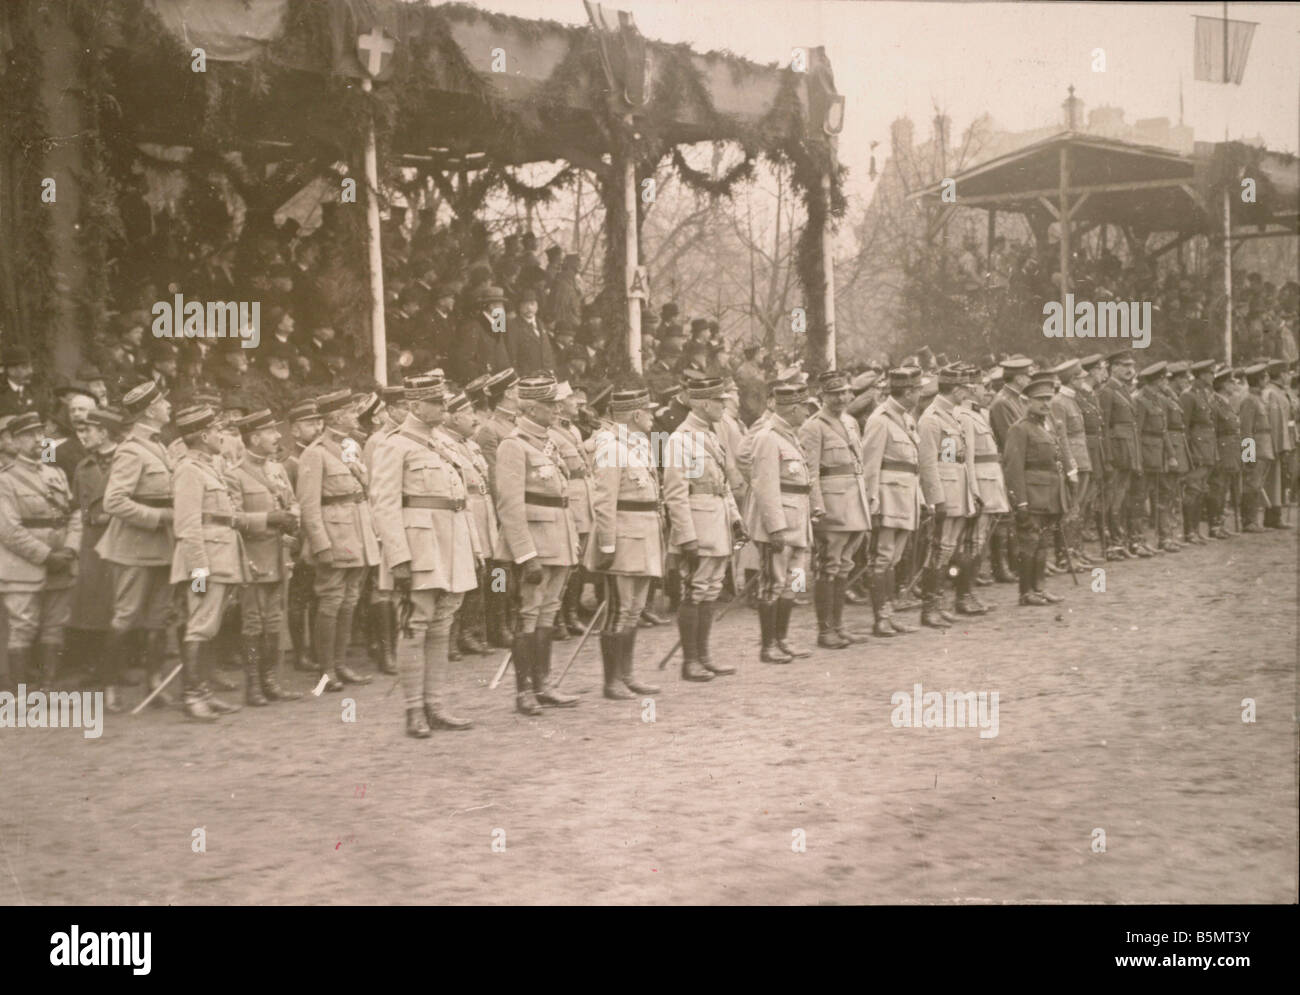 9FK 1918 12 8 A1 E Metz 1918 French a Allied generals World War 1 1914 18 End of War Metz 8th December 1918 After the ar mistice Stock Photo